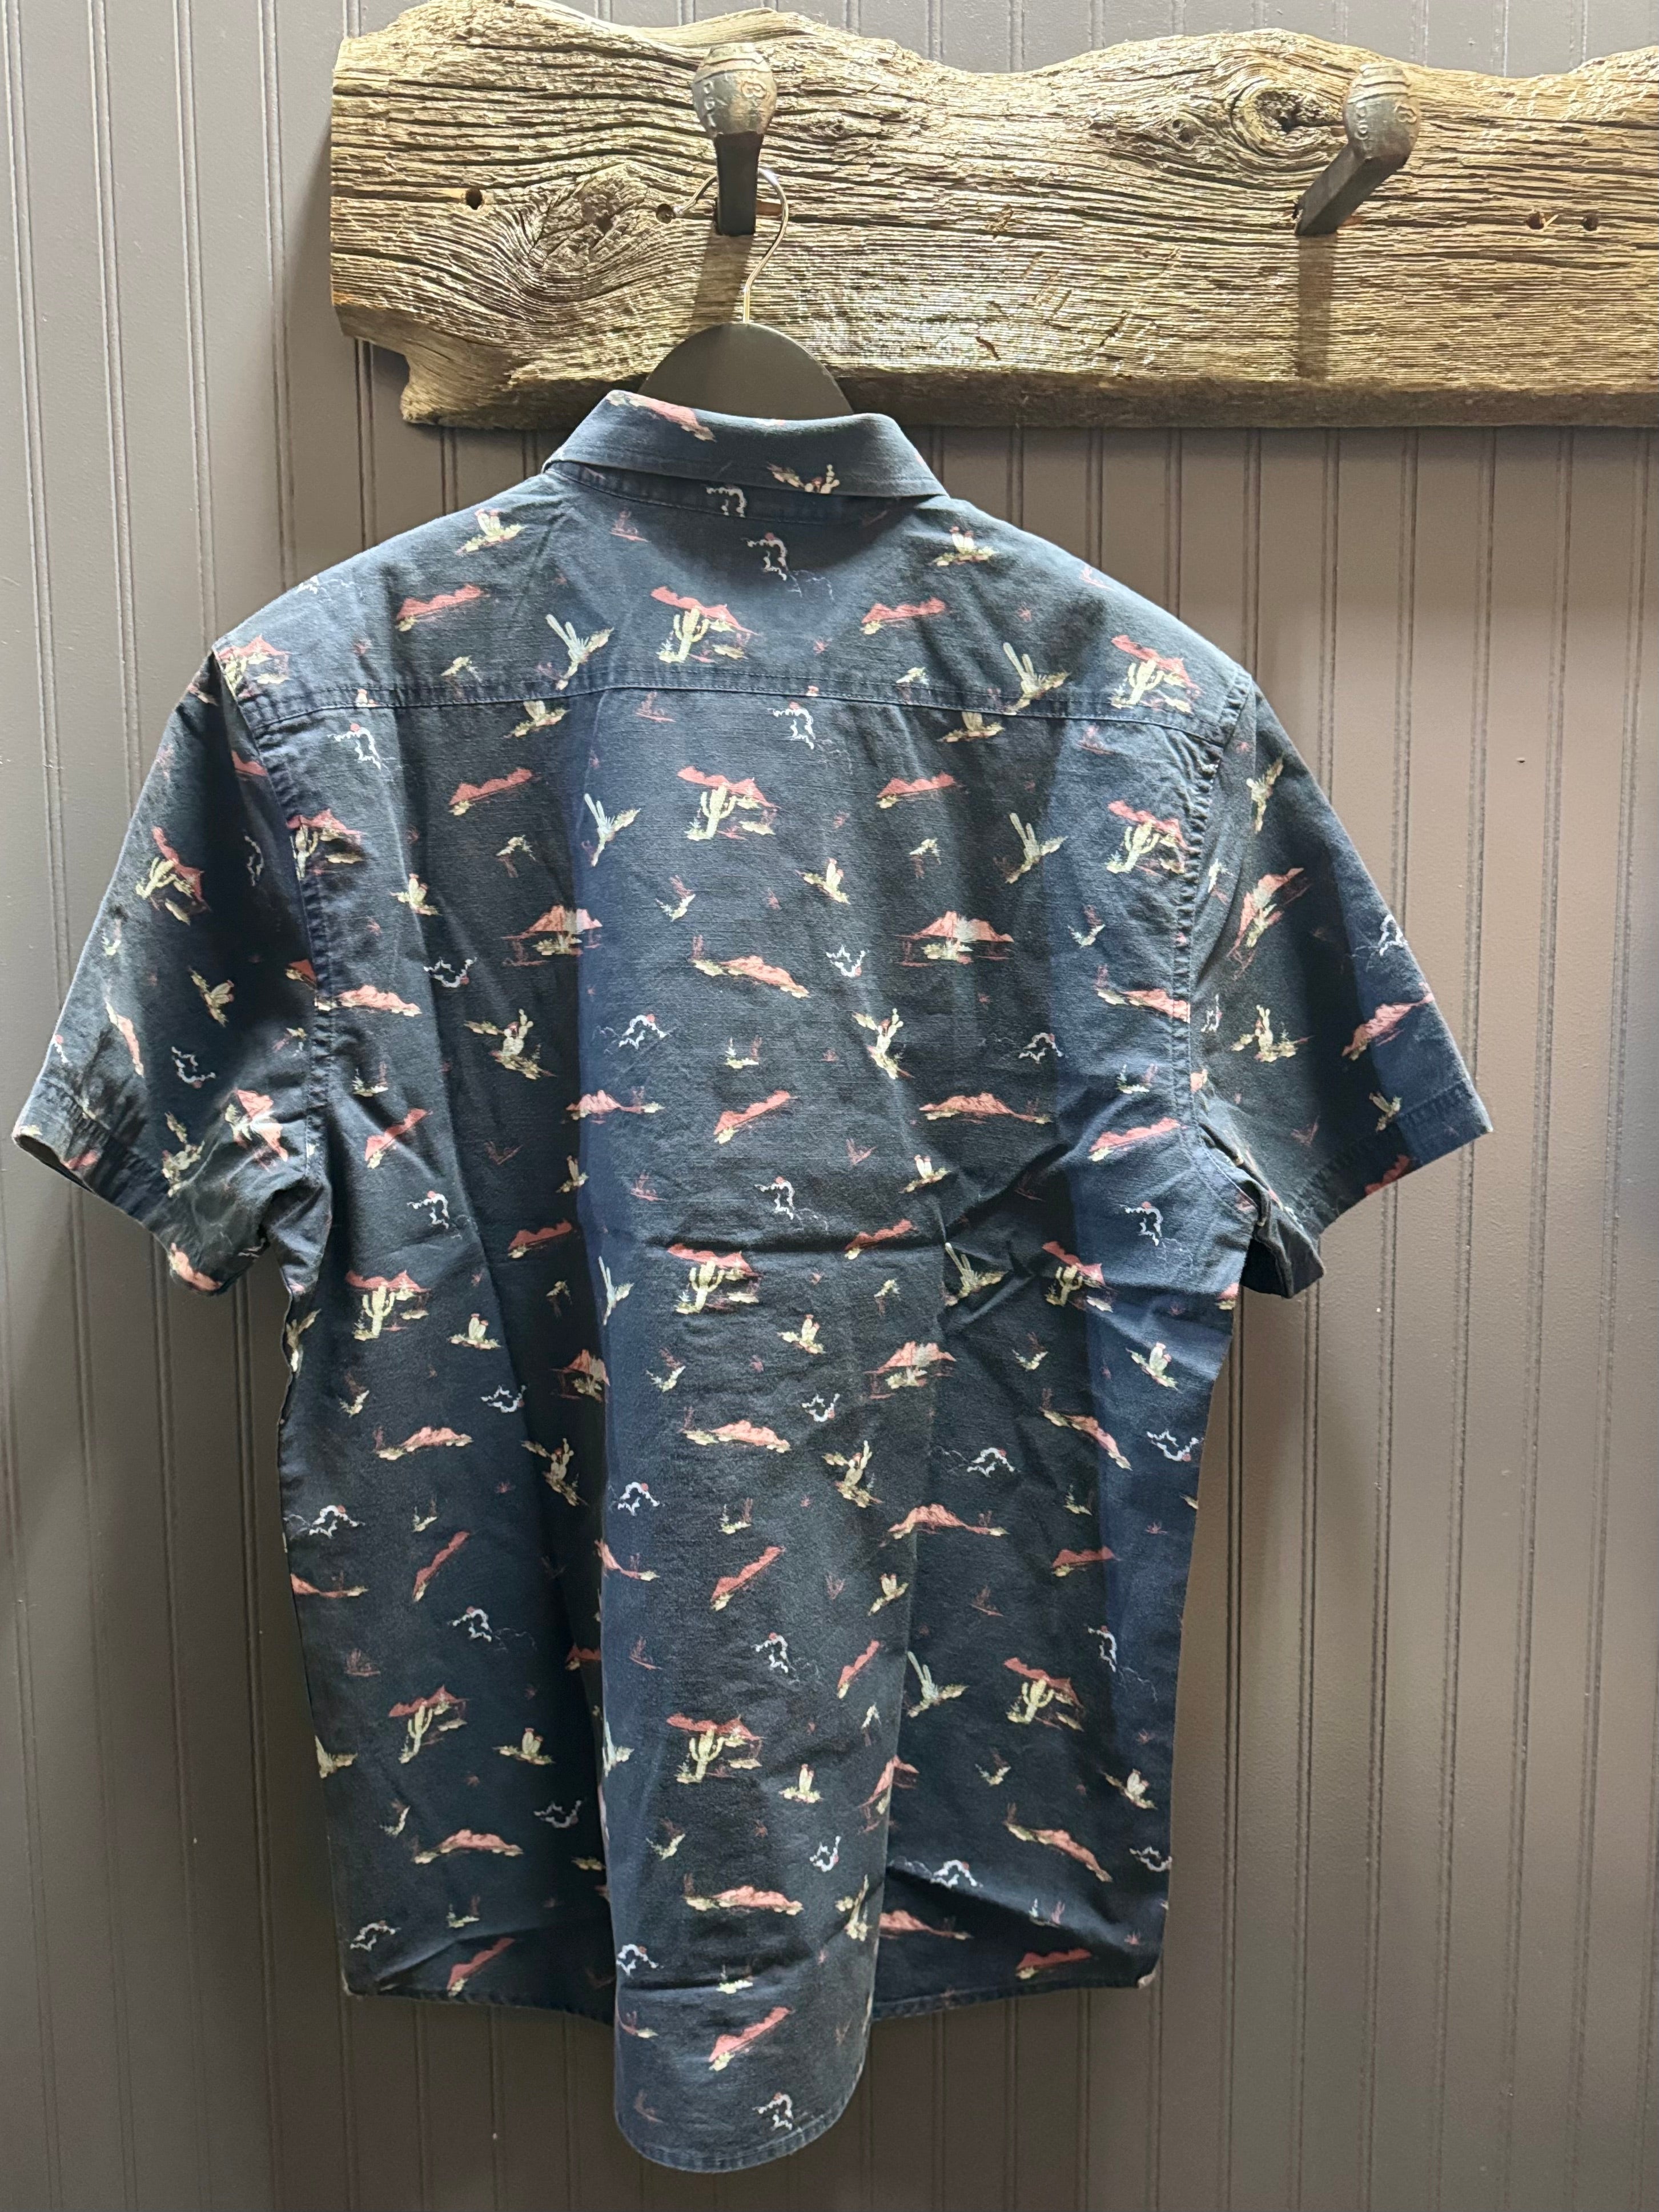 Anderson SS Vintage Shirt back